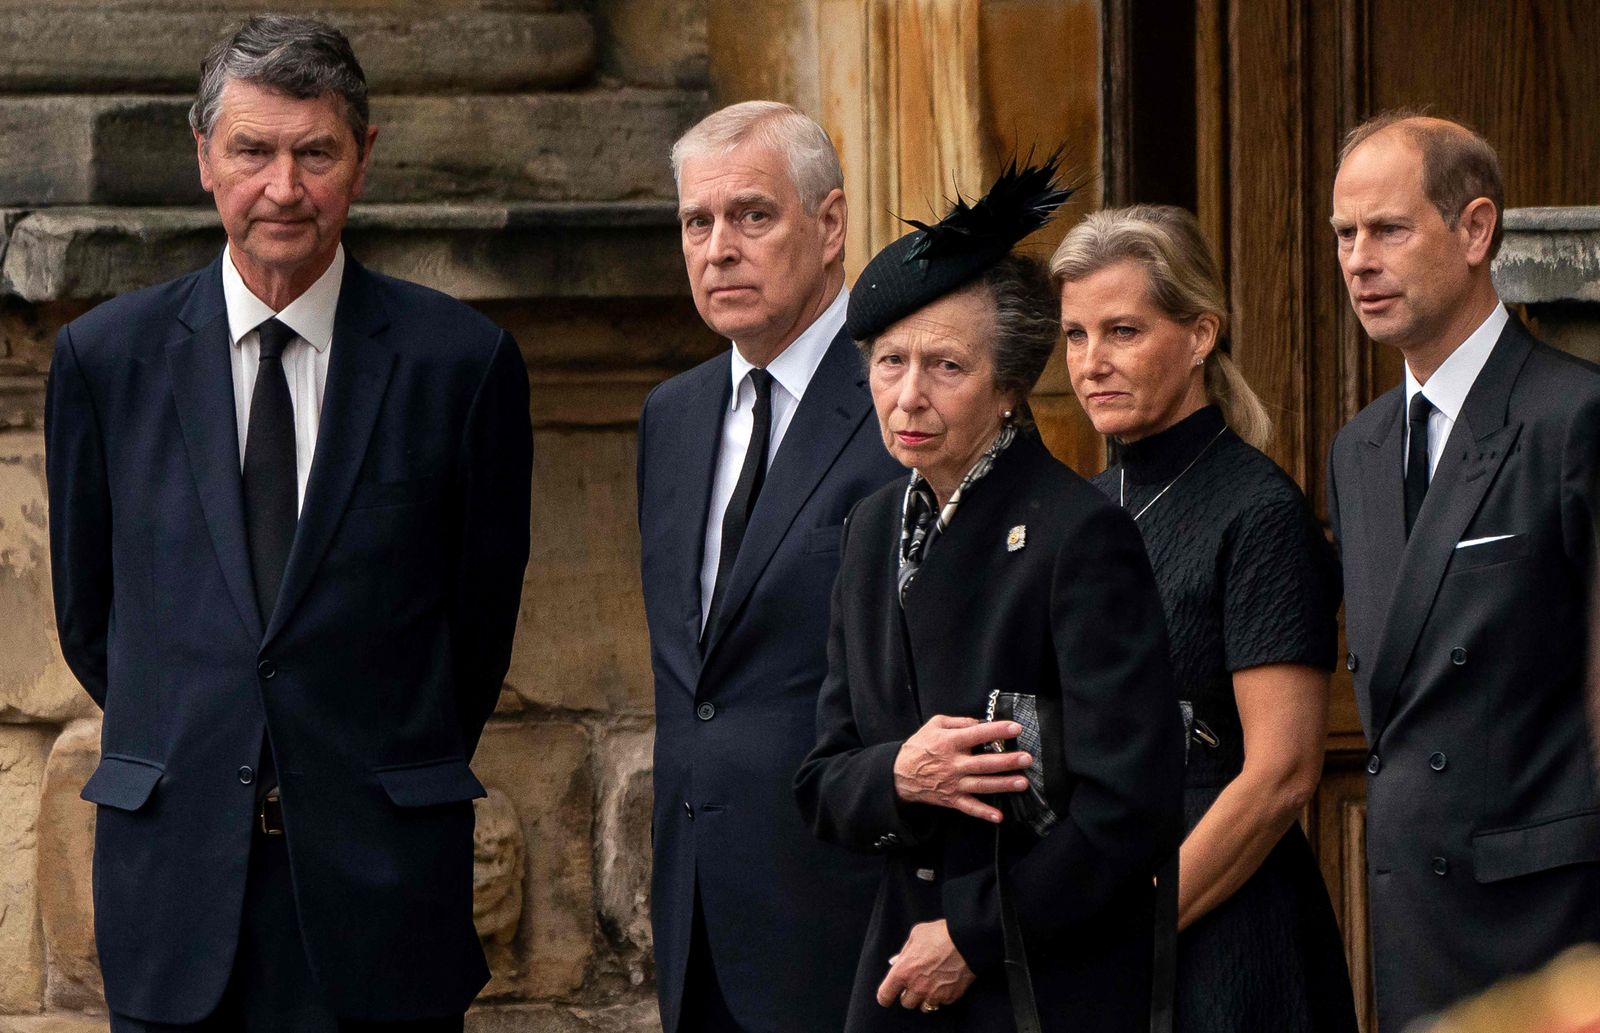 Vice Admiral Timothy Laurence (L) Britain's Prince Andrew, Duke of York (2L), Britain's Princess Anne, Princess Royal (C), Britain's Sophie, Countess of Wessex (2R) and Britain's Prince Edward, Earl of Wessex await the arrival of the hearse carrying the coffin of the late Queen Elizabeth II, at the Palace of Holyroodhouse, in Edinburgh on September 11, 2022. - Queen Elizabeth II's coffin will travel by road through Scottish towns and villages on Sunday as it begins its final journey from her beloved Scottish retreat of Balmoral. The Queen, who died on September 8, will be taken to the Palace of Holyroodhouse before lying at rest in St Giles' Cathedral, before travelling onwards to London for her funeral.. (Photo by Aaron Chown / POOL / AFP) - AFP